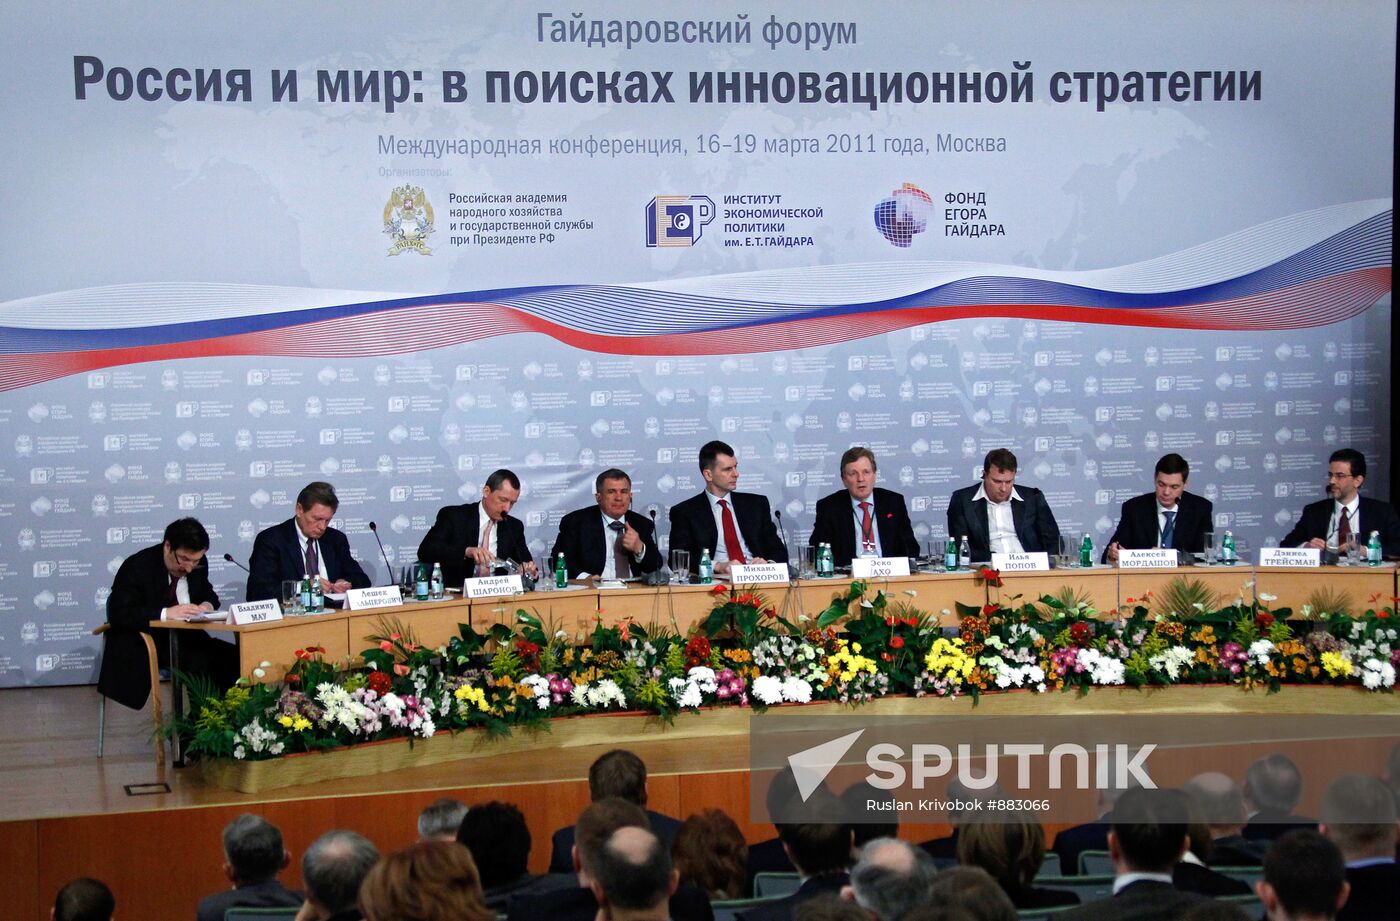 Conference "Russia and the World: Searching for Innovative Strat